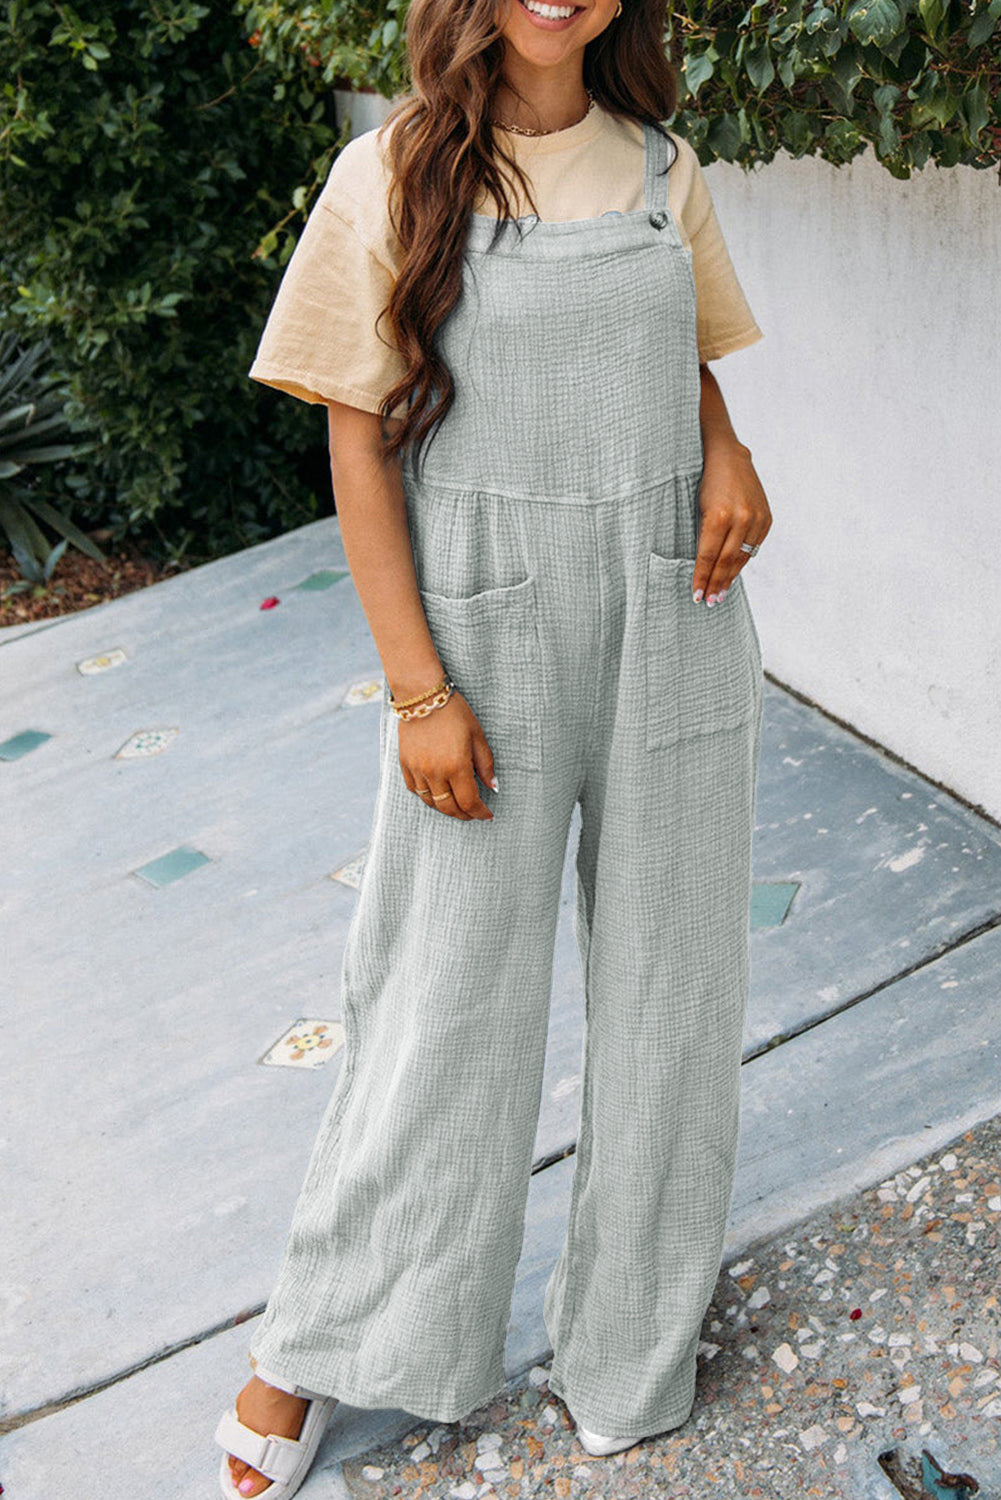 Wholesale Gray Textured Wide Leg Overall with Pockets